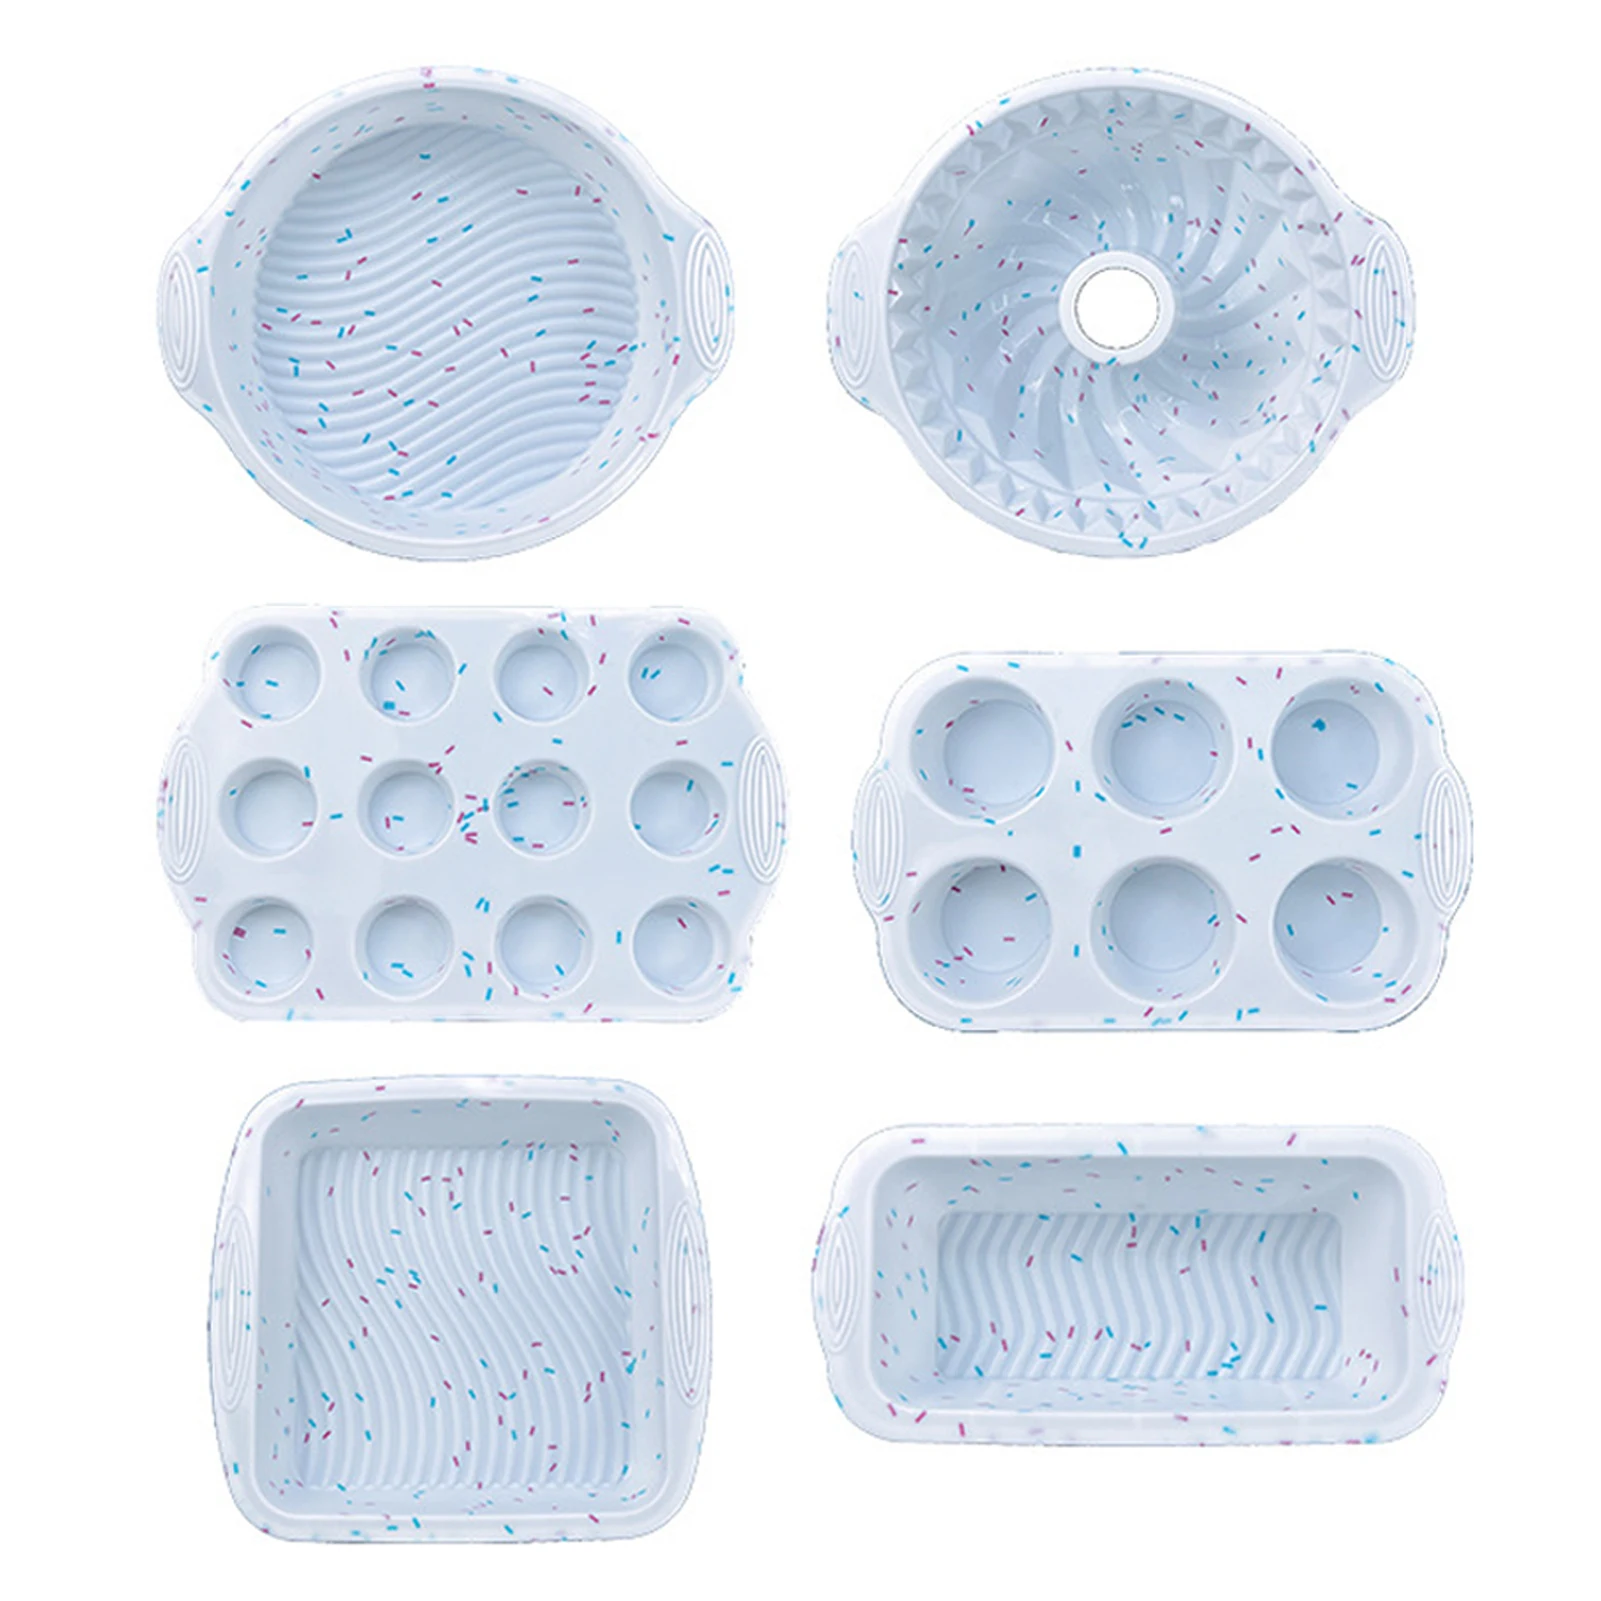 

6pcs/set Cupcake Bread Soft Silicone Reusable With Handles Heat Resistant Non Stick Easy Clean Cake Mold Anti Scald Bakeware